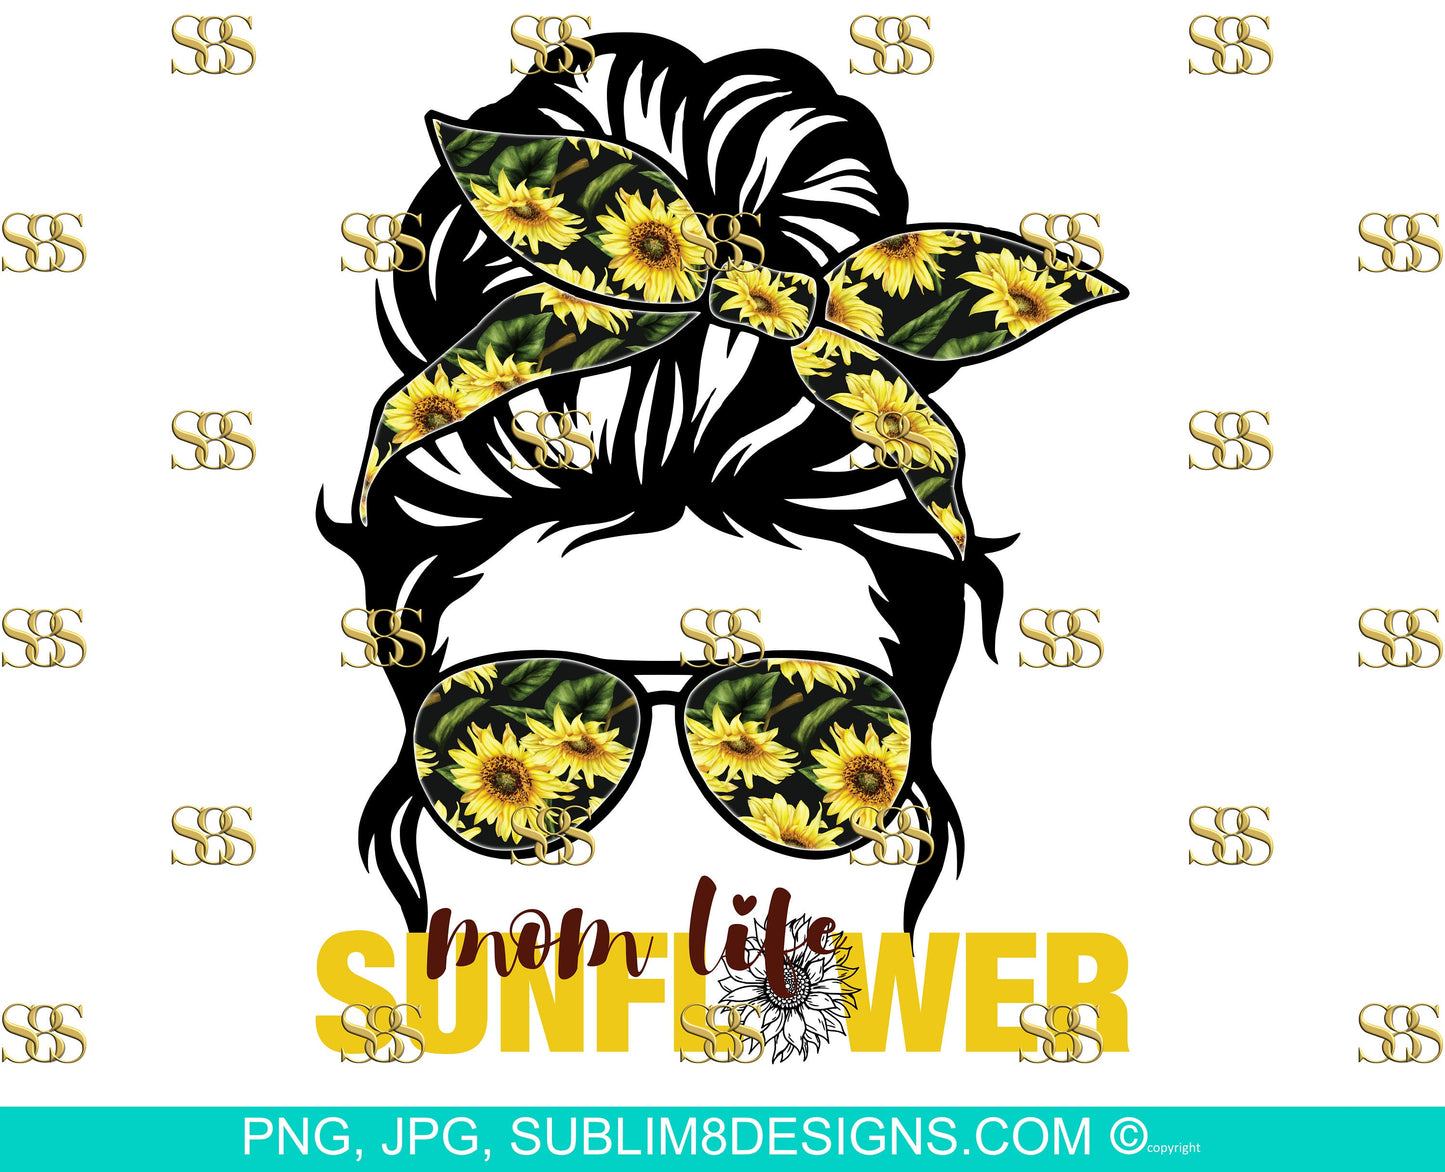 Sunflower Mom Life Sublimation Design PNG and JPG ONLY